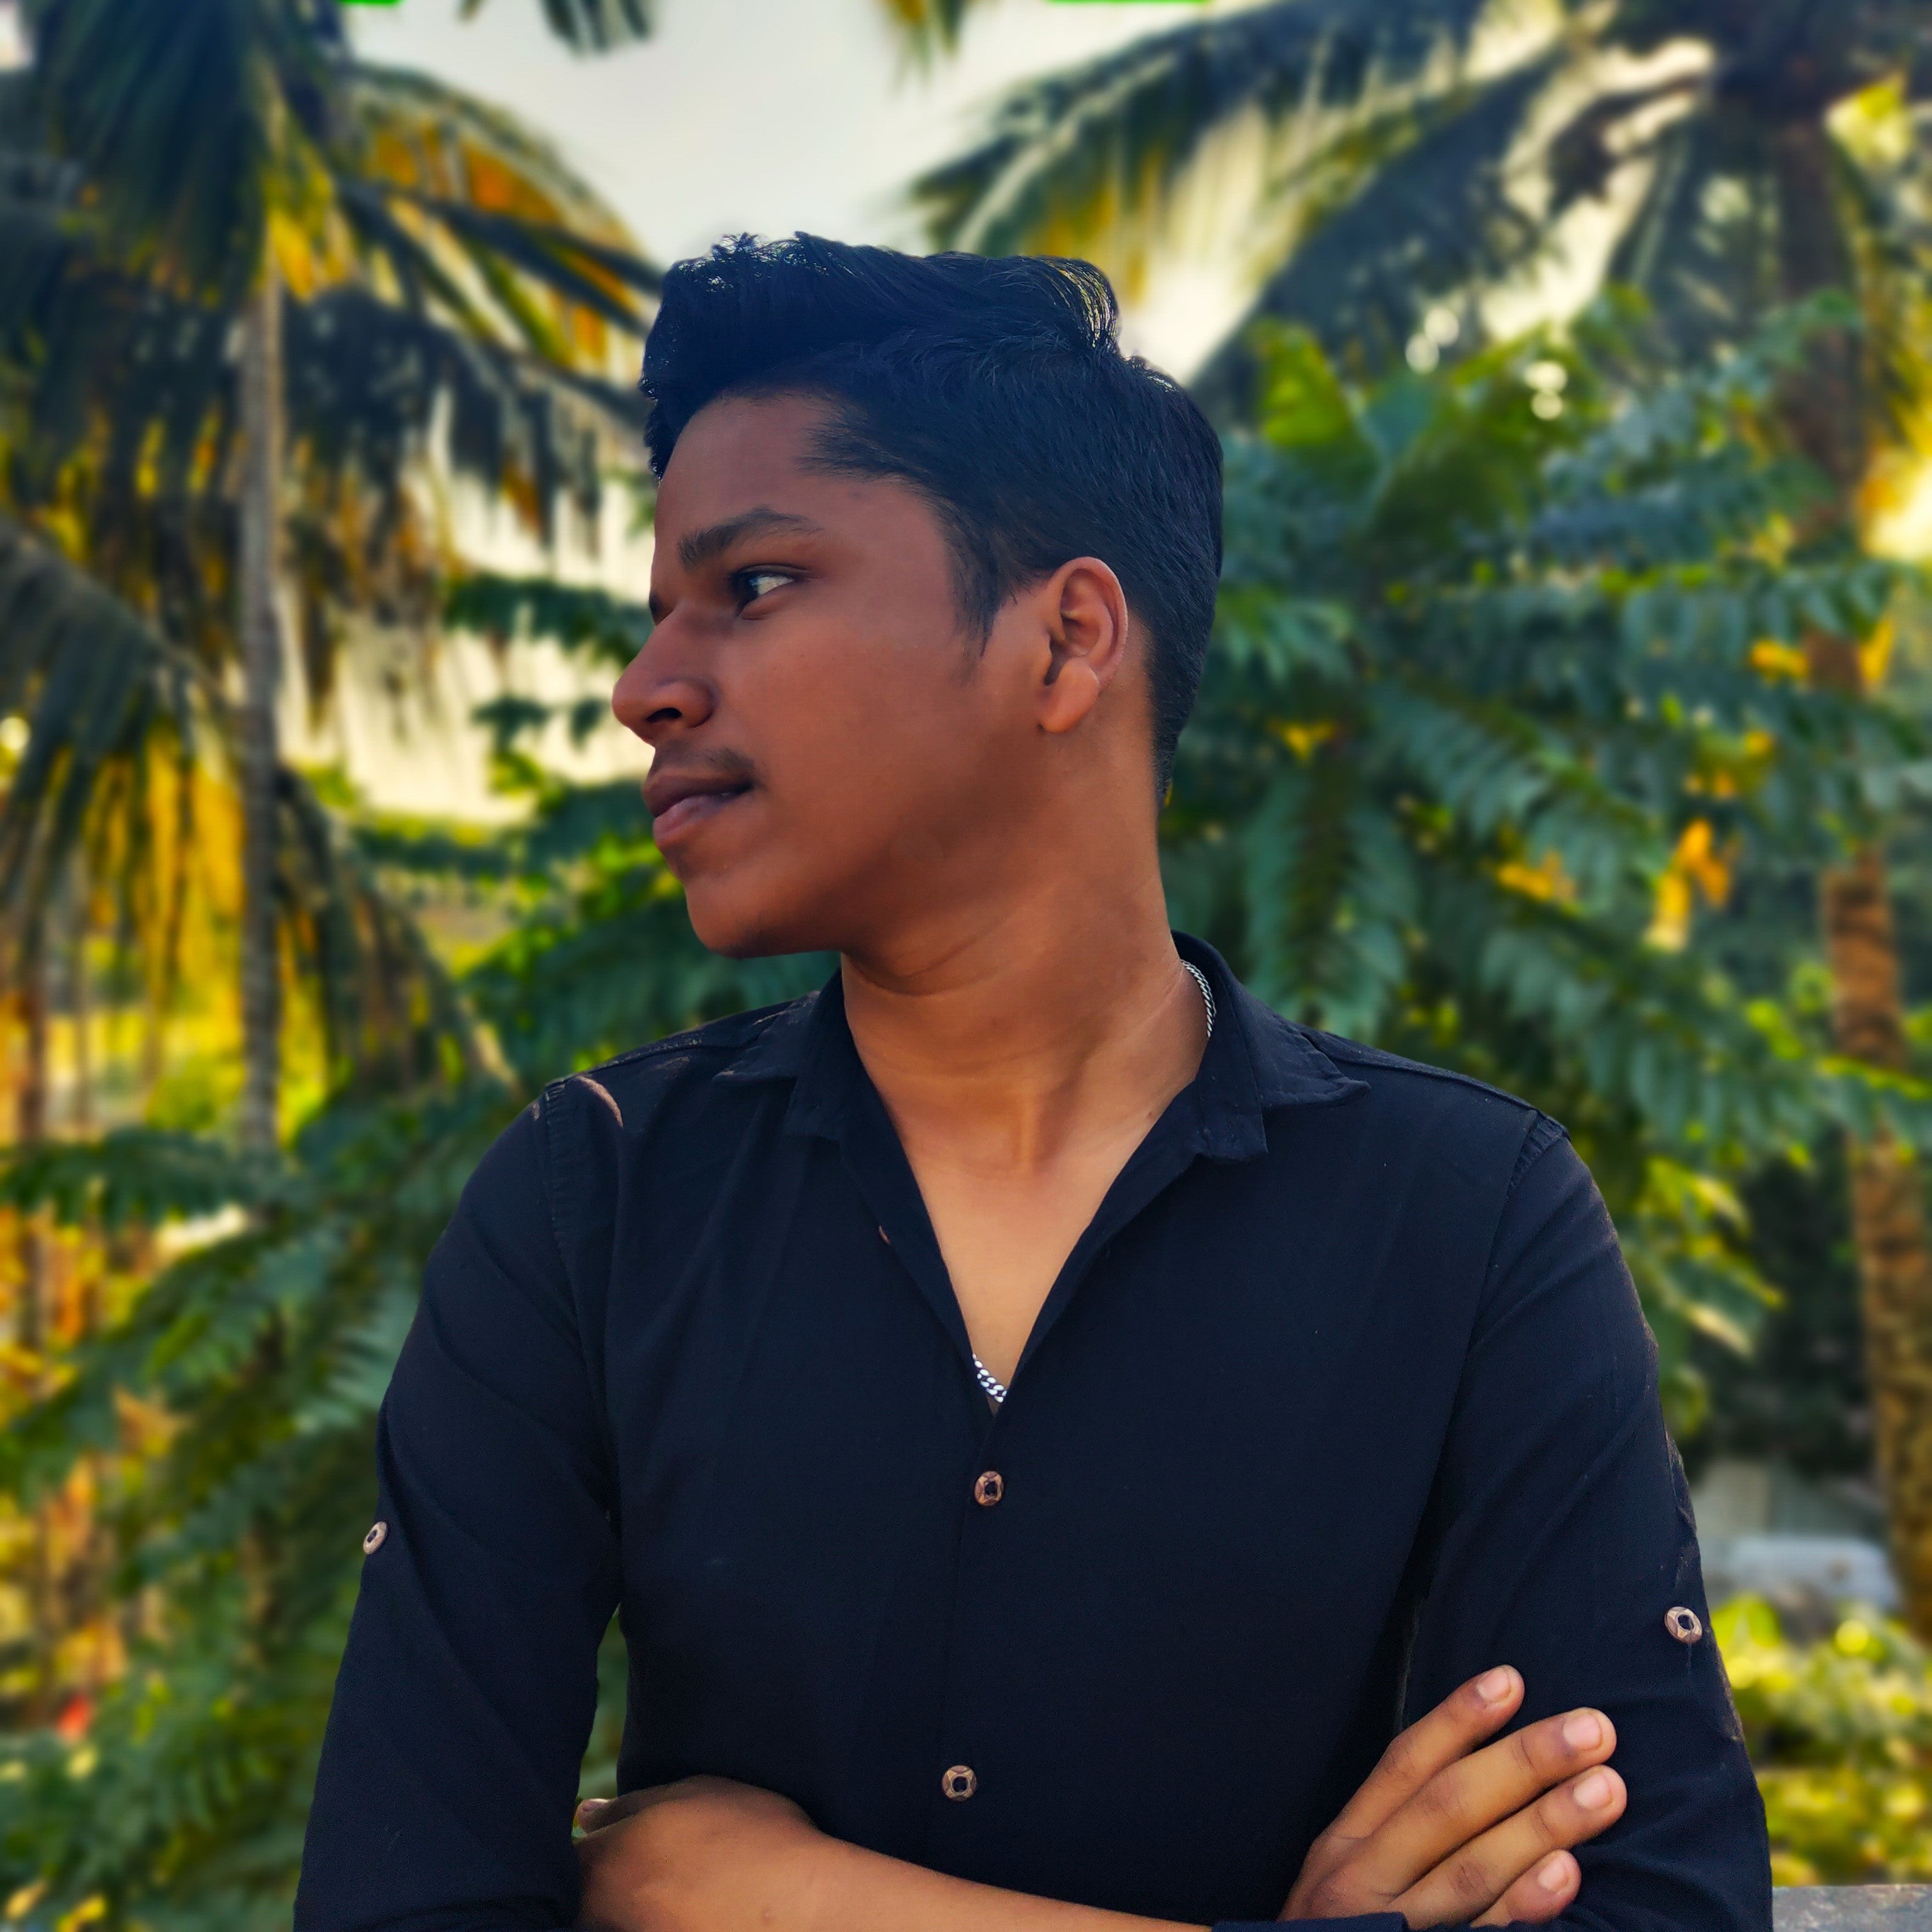 Young and Dynamic: Meet MD Aslam, the 18-Year-Old Manager of HS Gadget